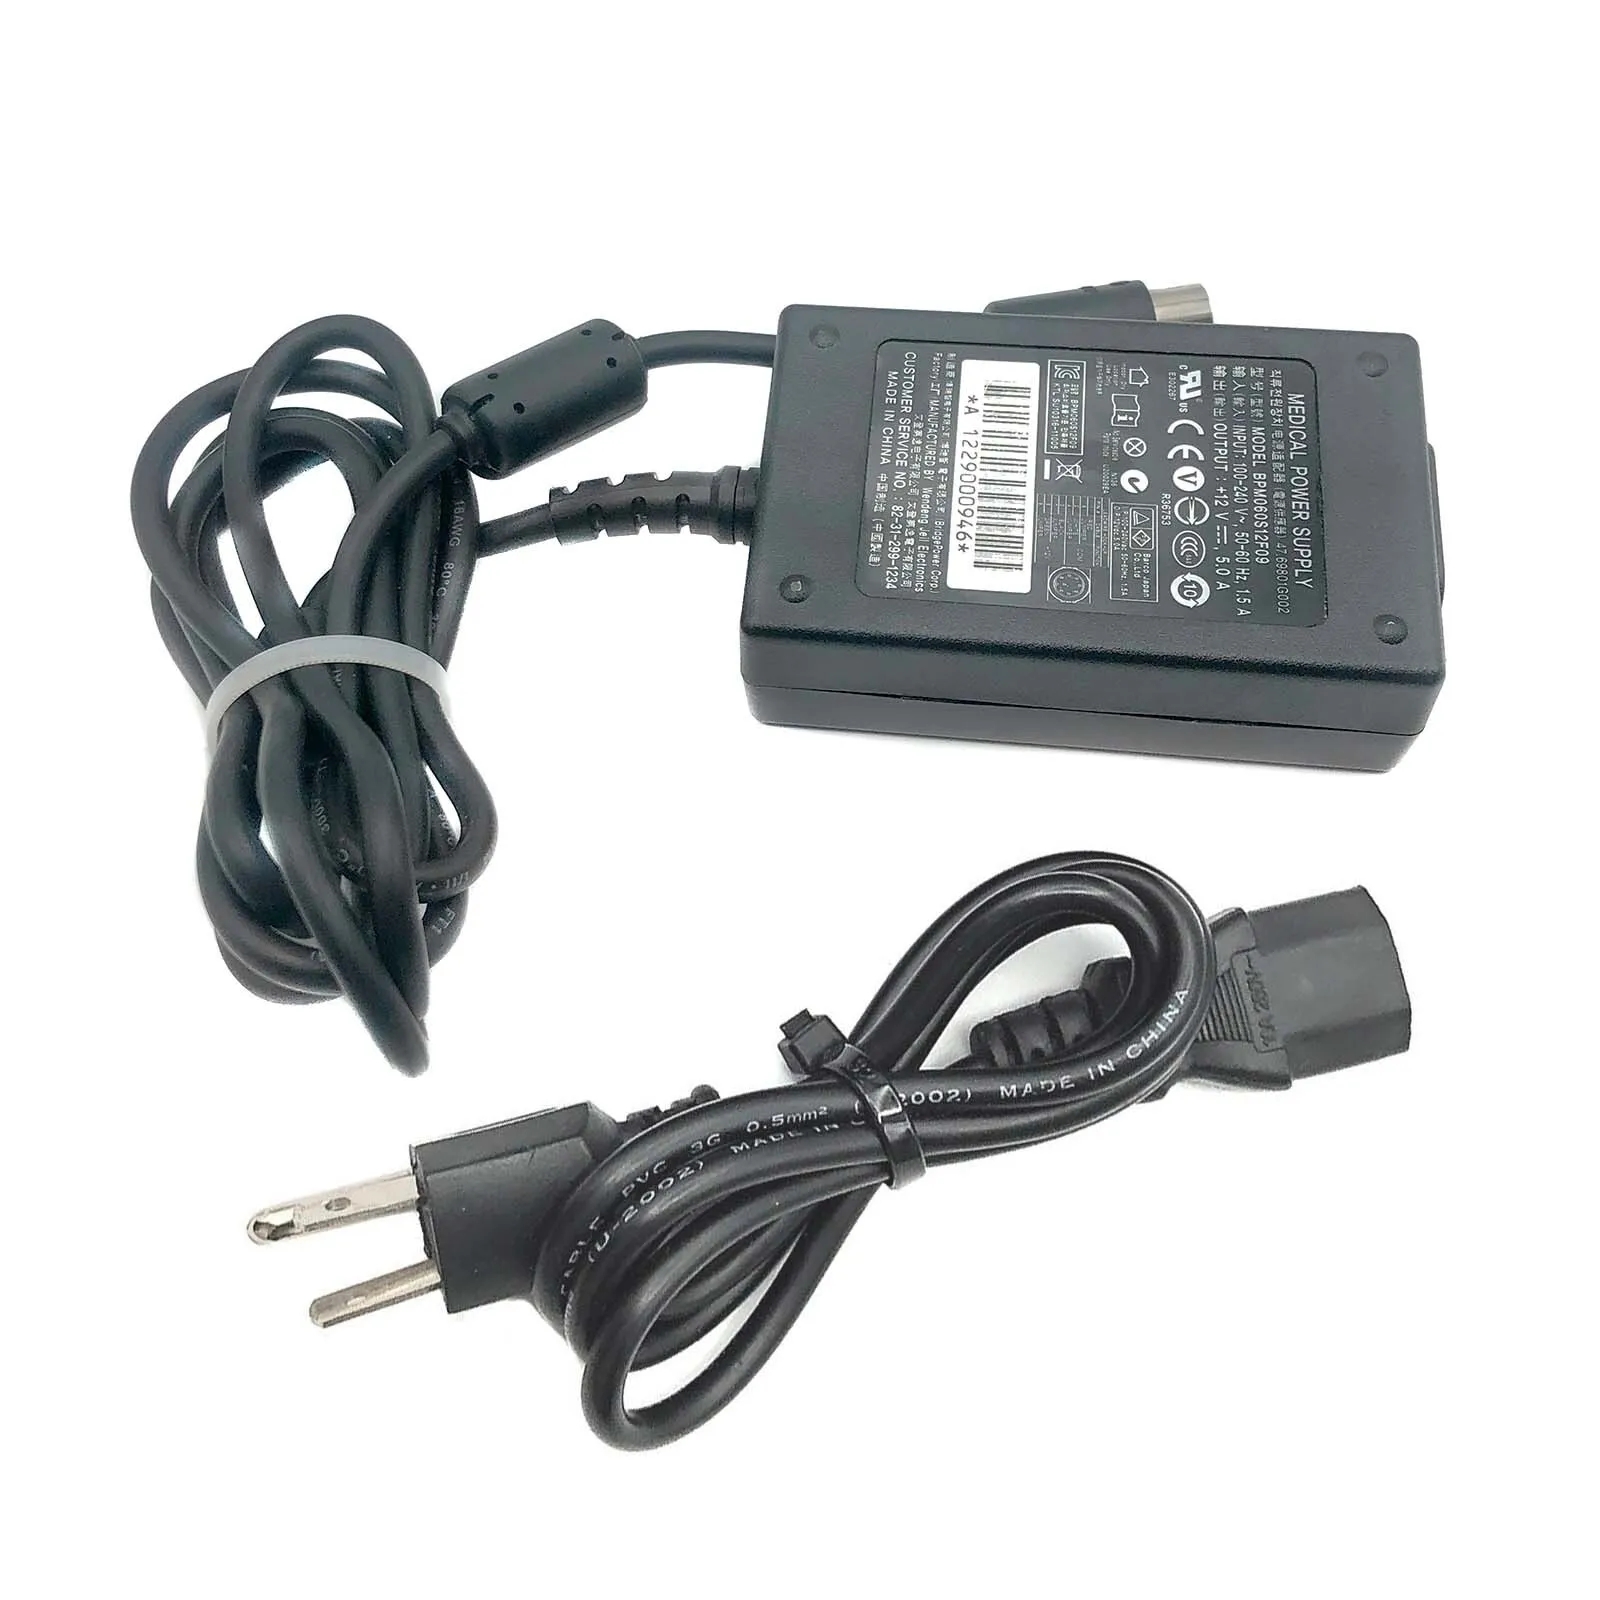 *Brand NEW*BPM060S12F09 Genuine Wendeng Jeil Electronics 12V 5.0A AC Adapter for Barco MDRC-1119 Monitor POWER